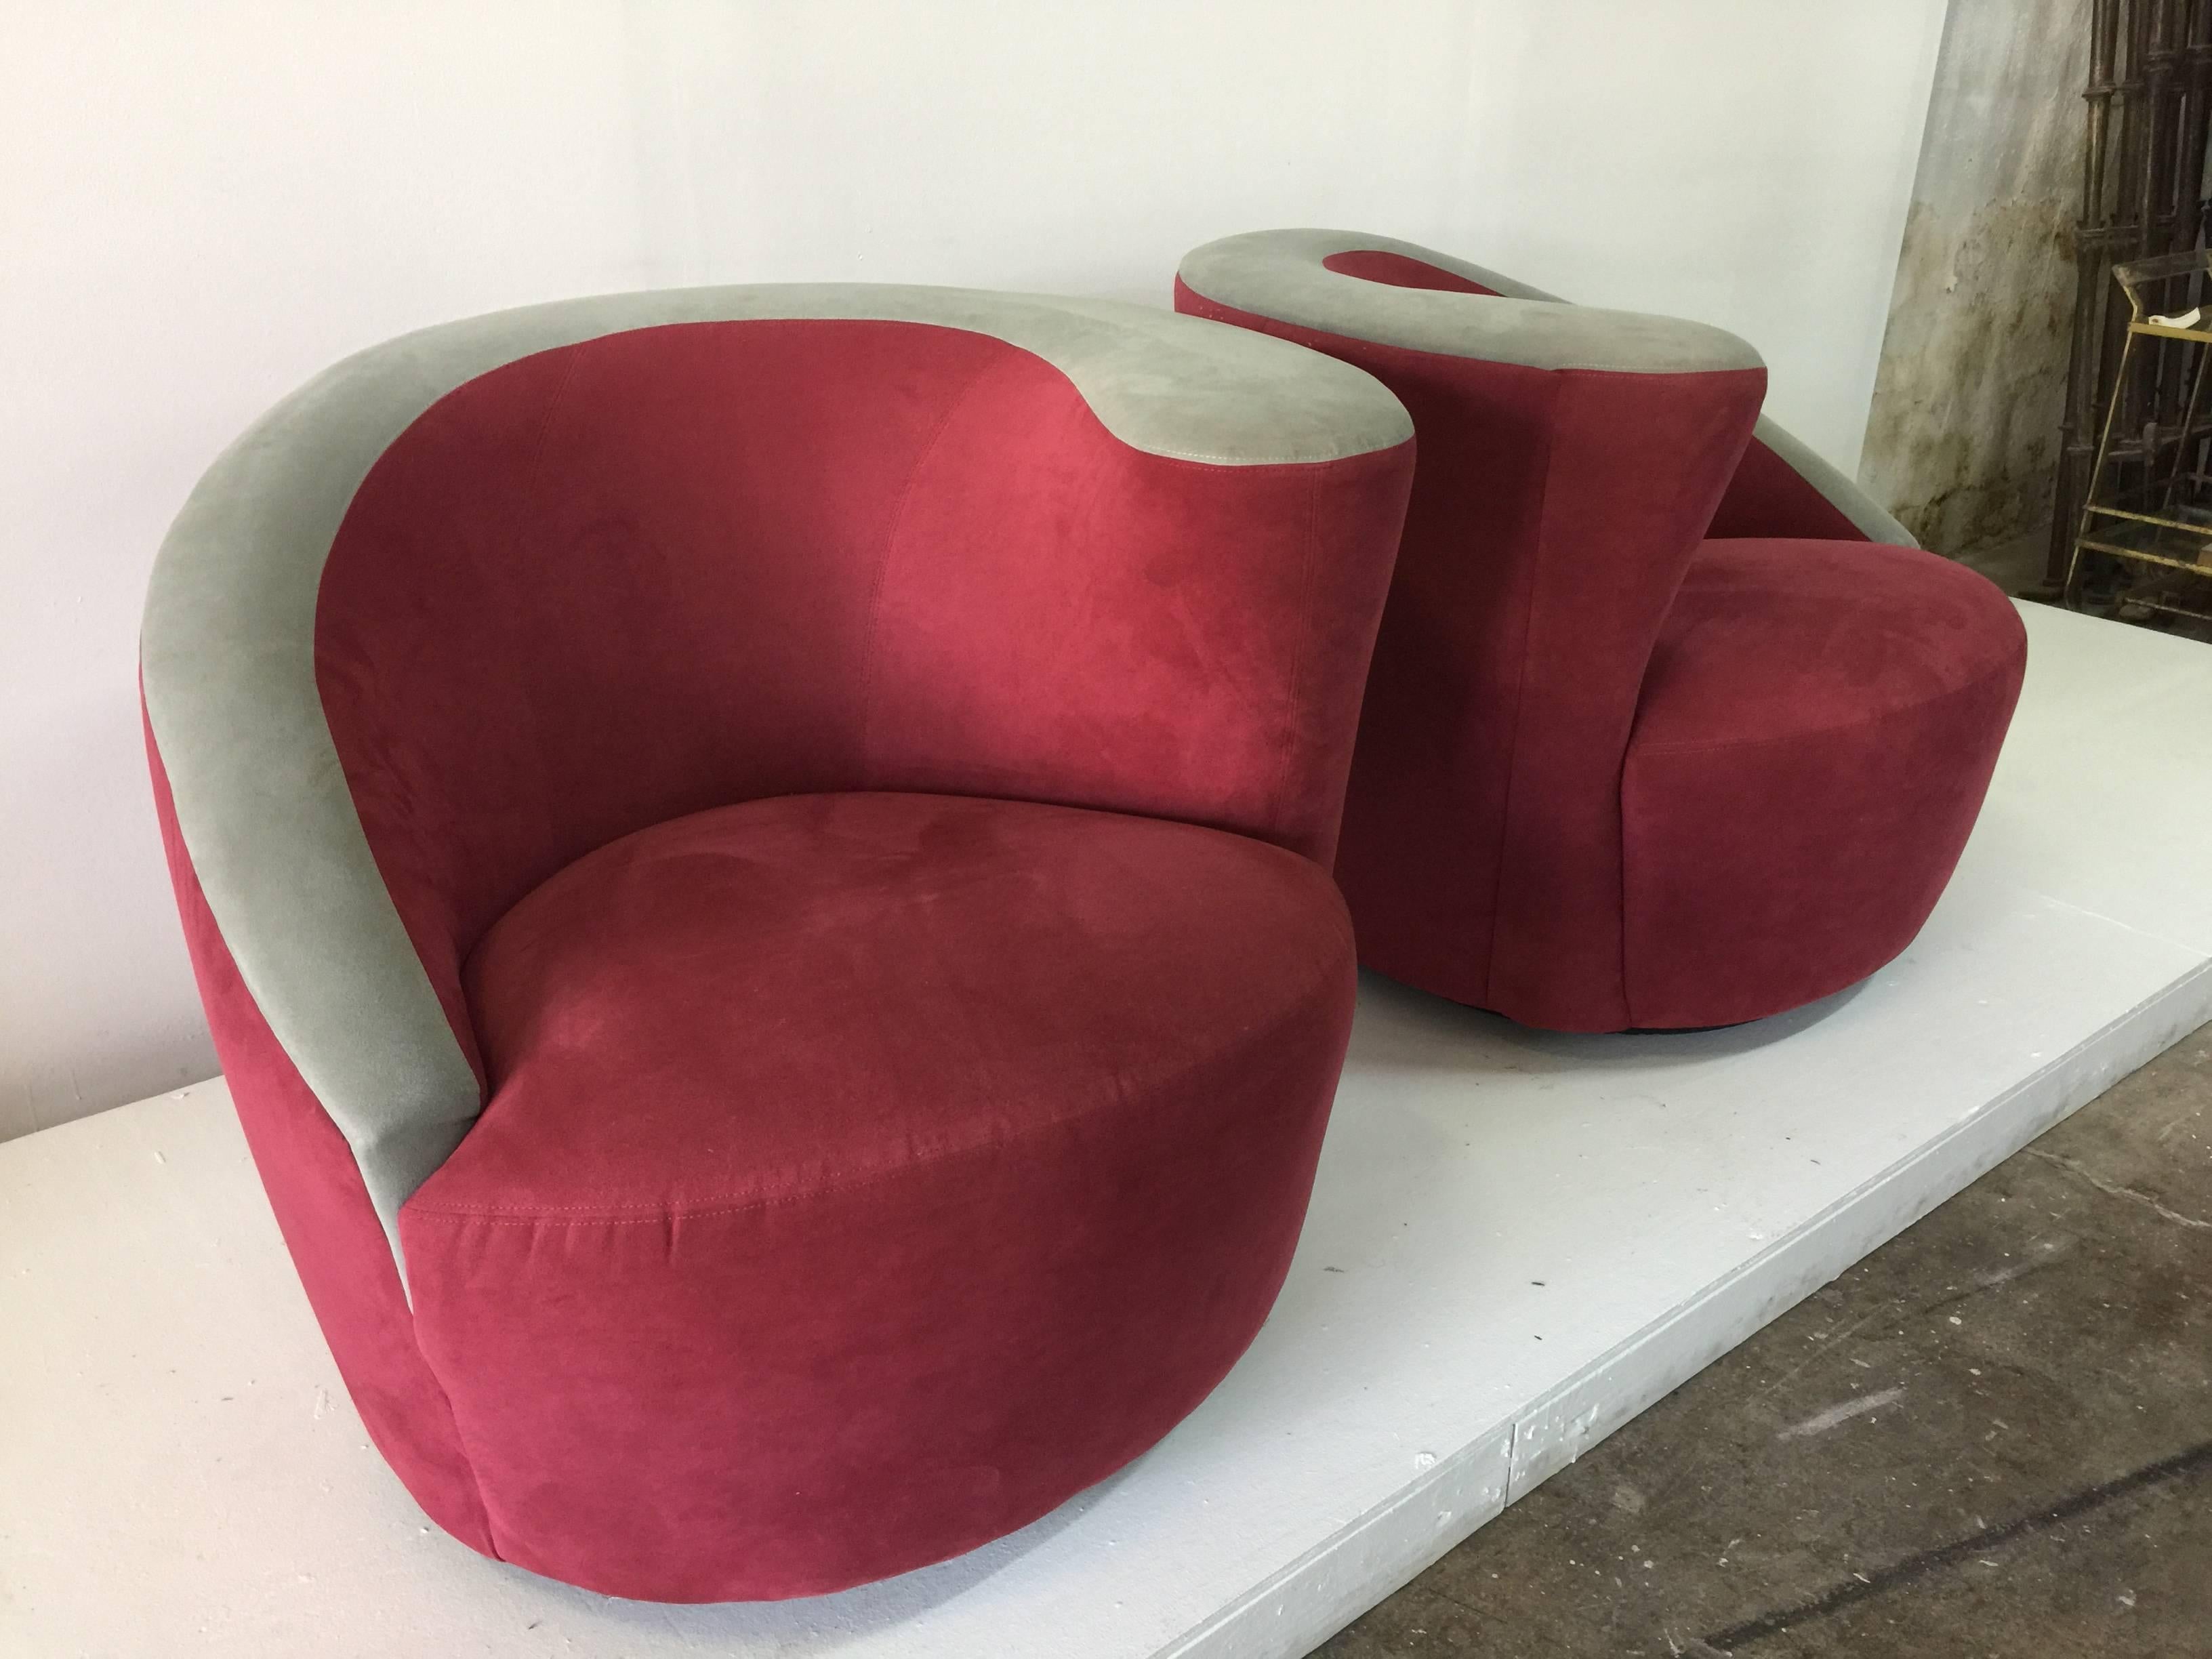 All original vintage fabric in two-tones. These are well proportioned swivel chairs by Vladimir Kagan.